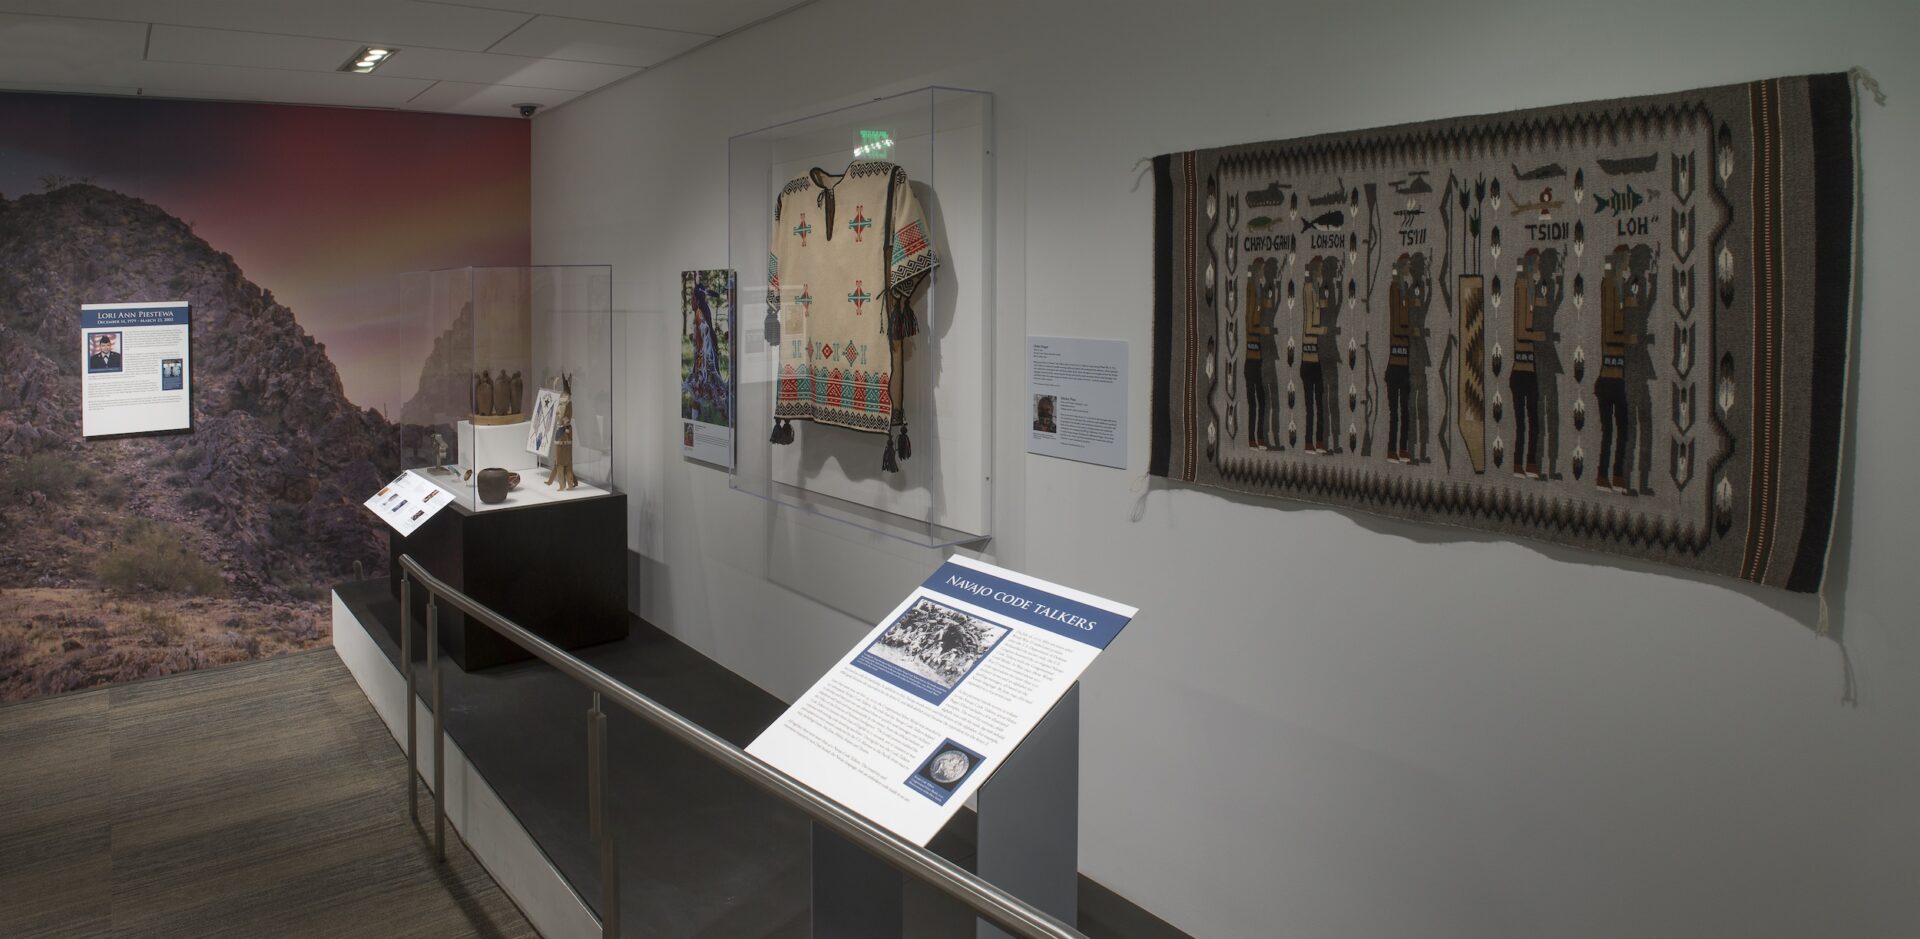 A display of Native fashion garments and textiles in a gallery.